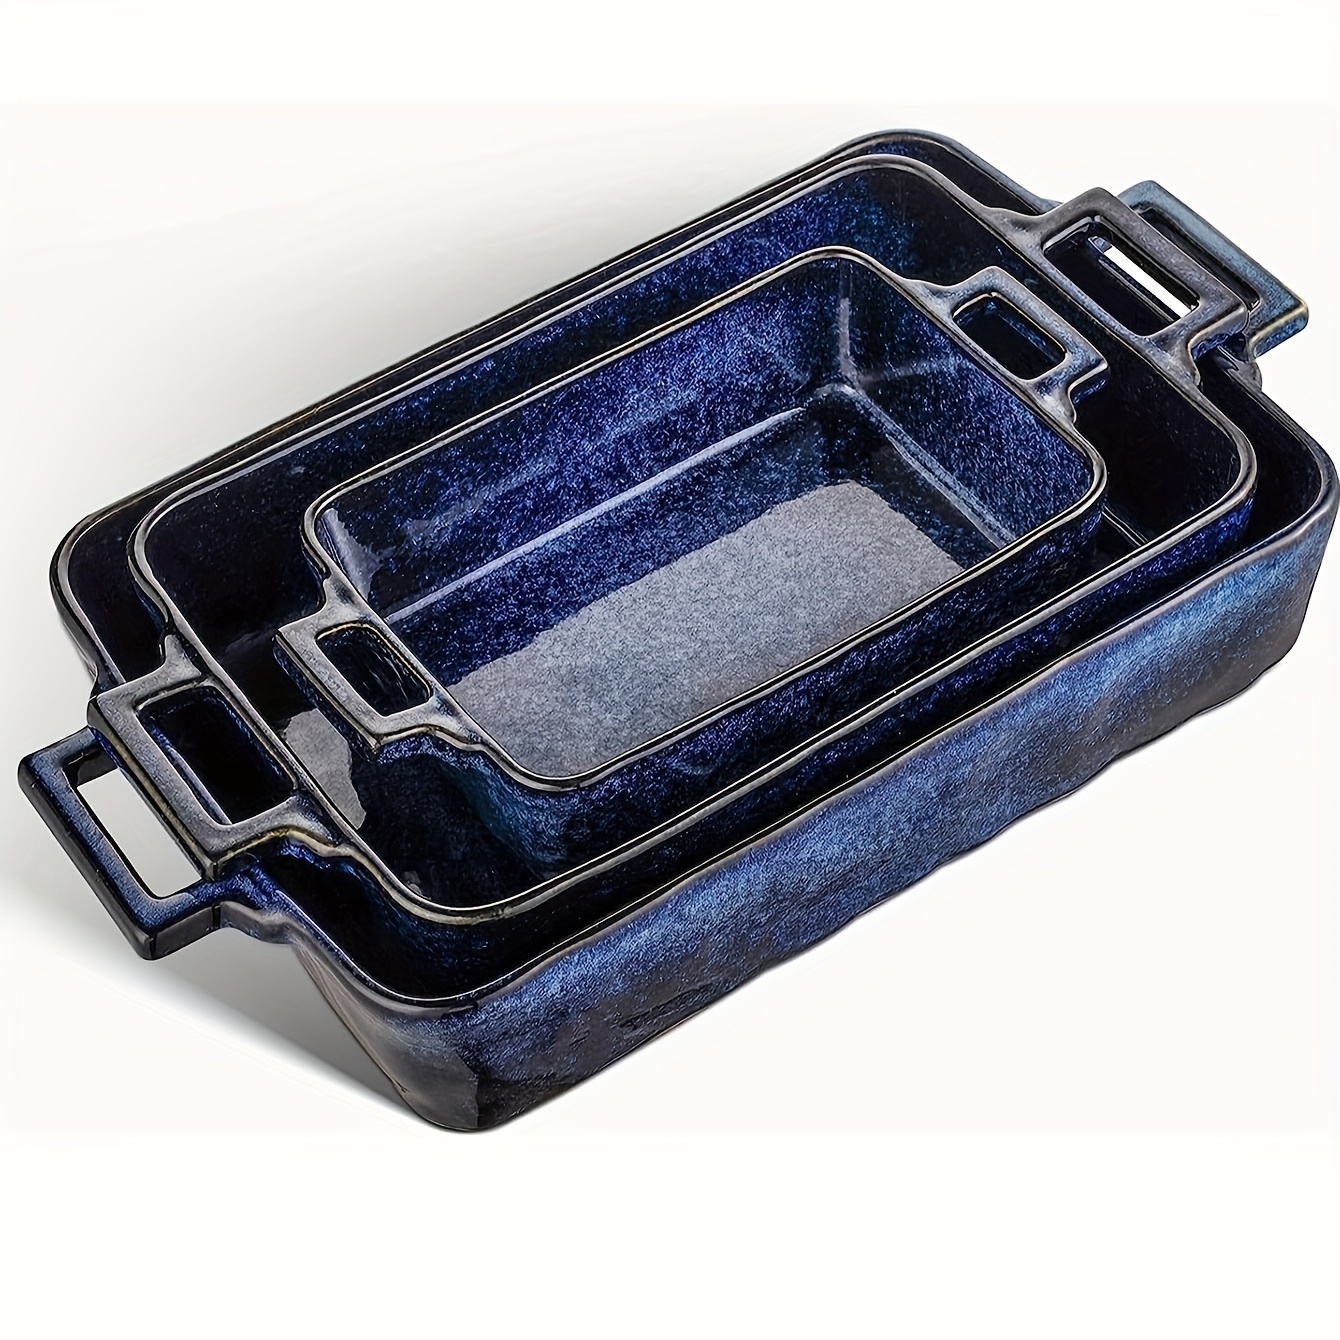 

3 Pcs, Set, Porcelain Rectangular Lasagna Pans Casserole Dish Set For Baking, Cooking, Kitchen, Cake Dinner, Banquet And Daily Use, 15 X 8.5 Inches (blue)